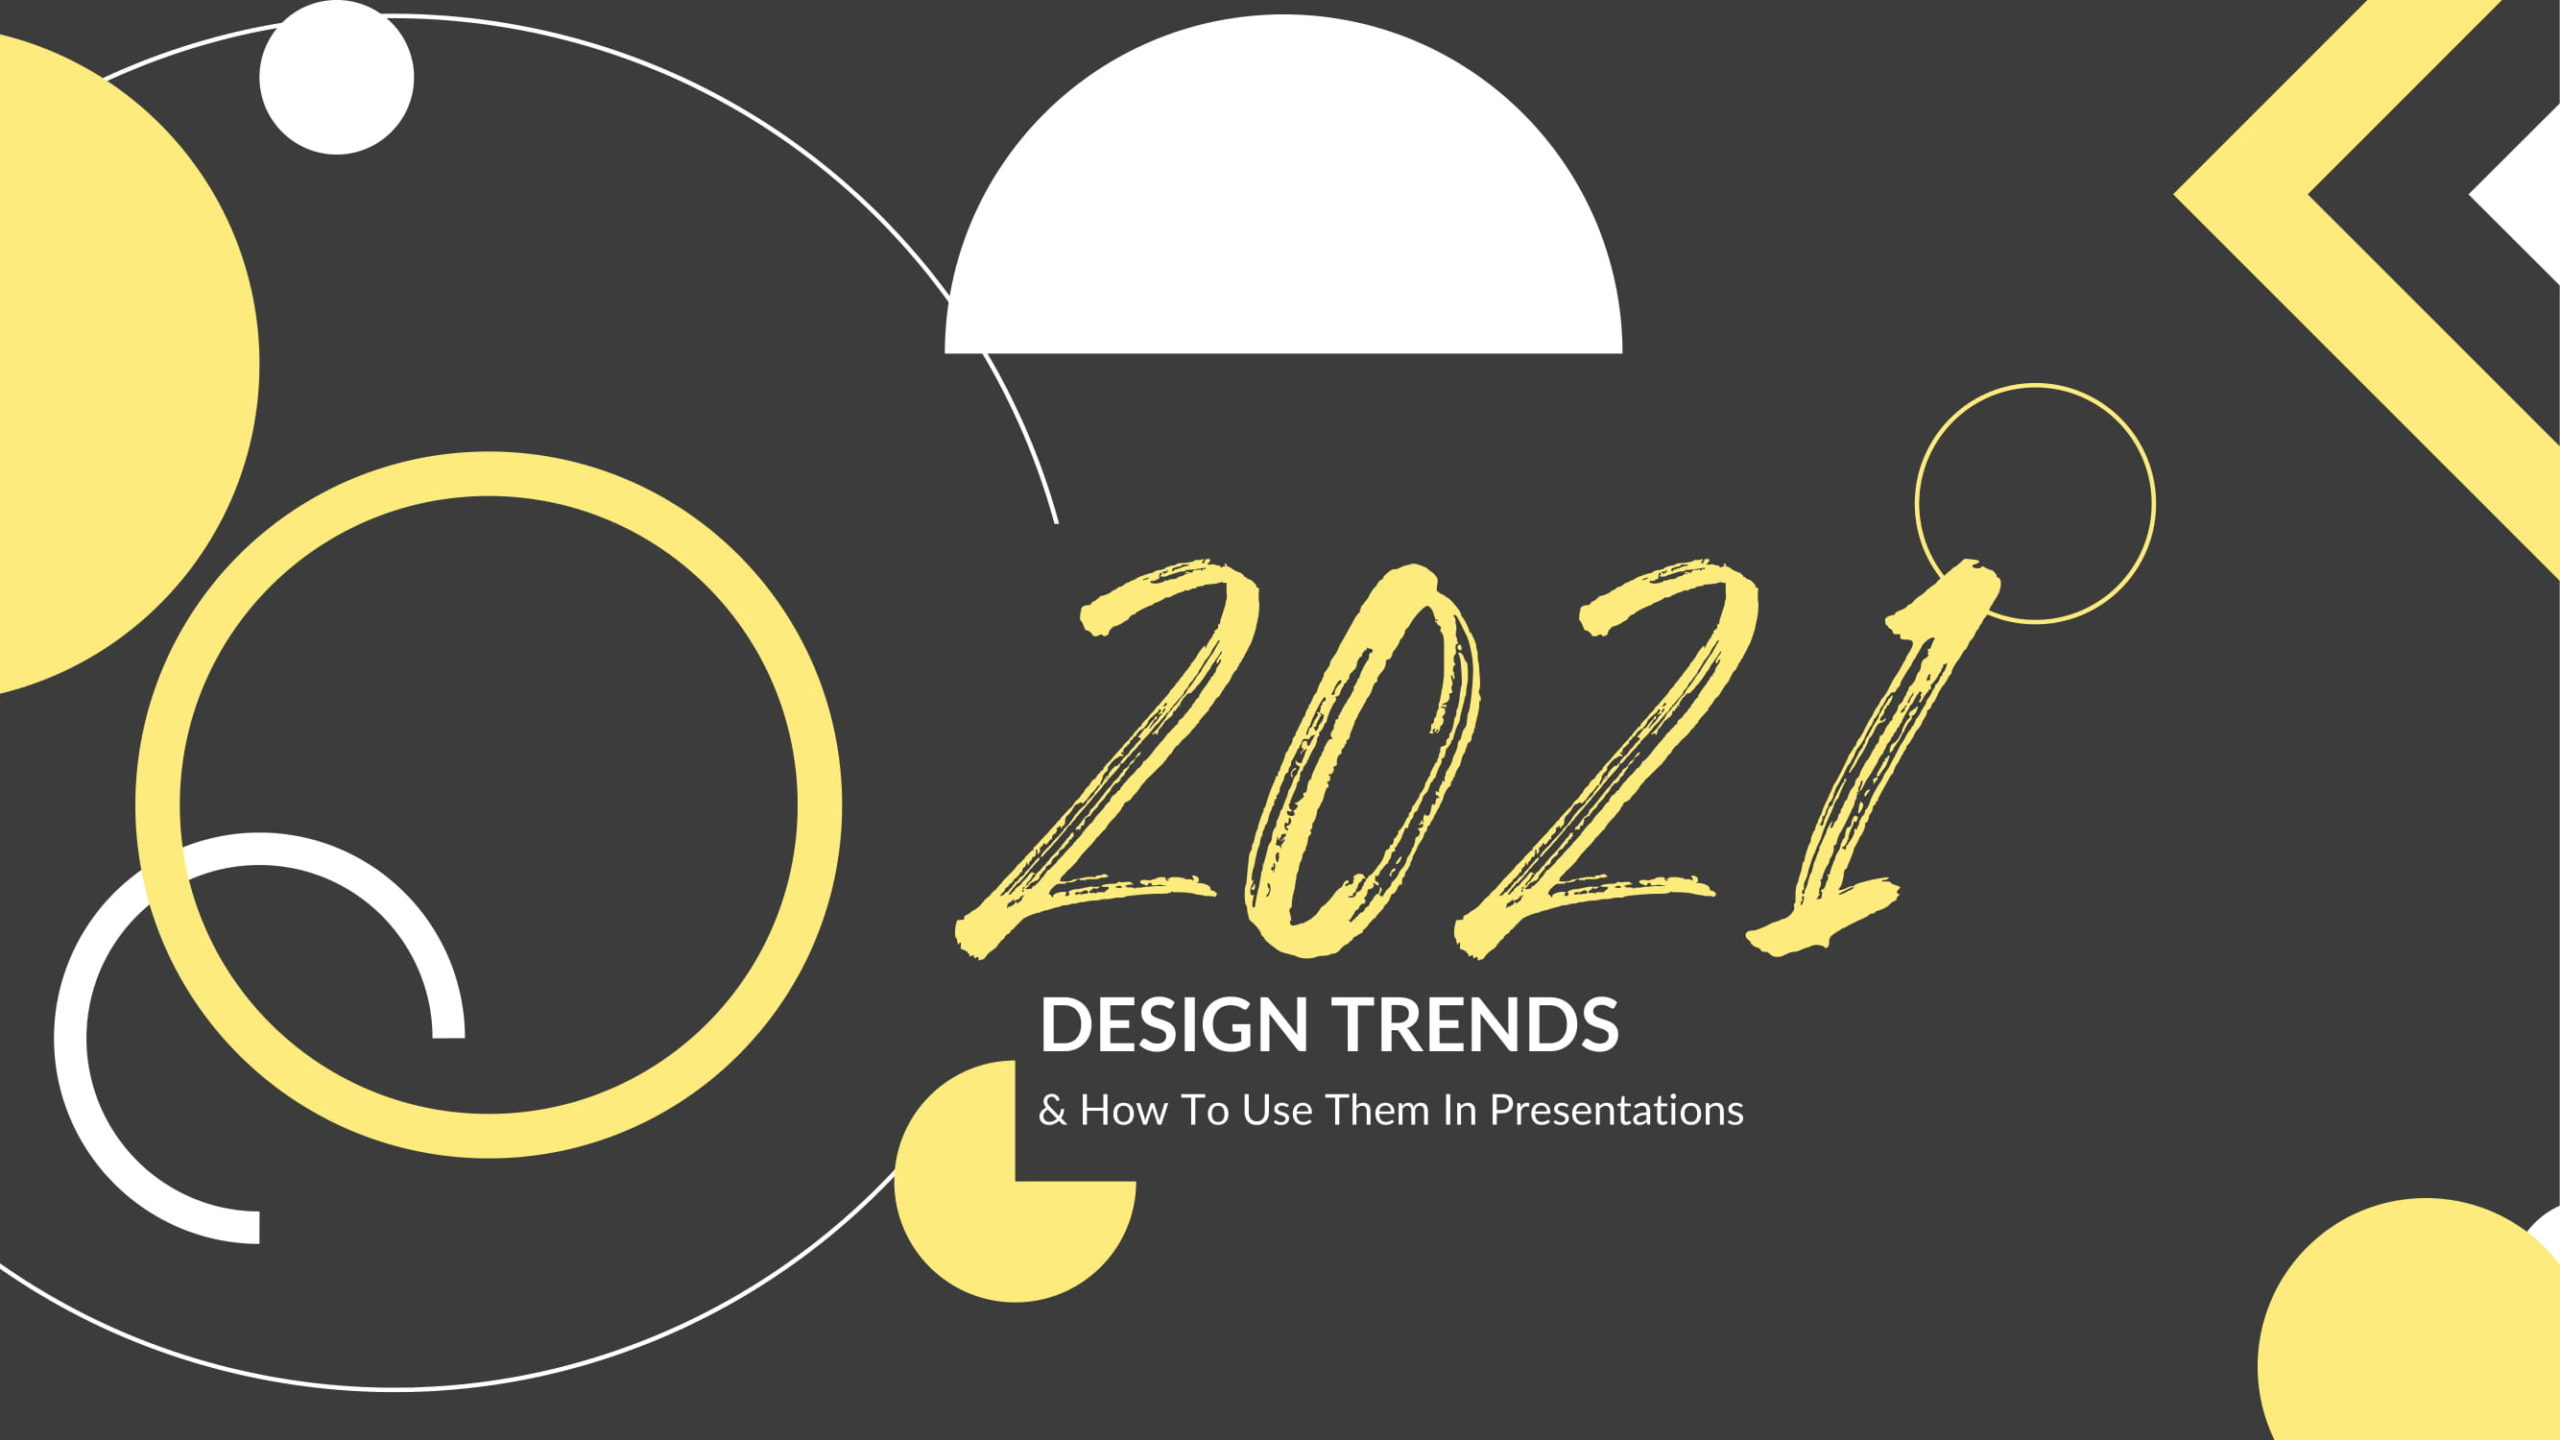 Featured image for “2021 Design Trends and their use in presentations”